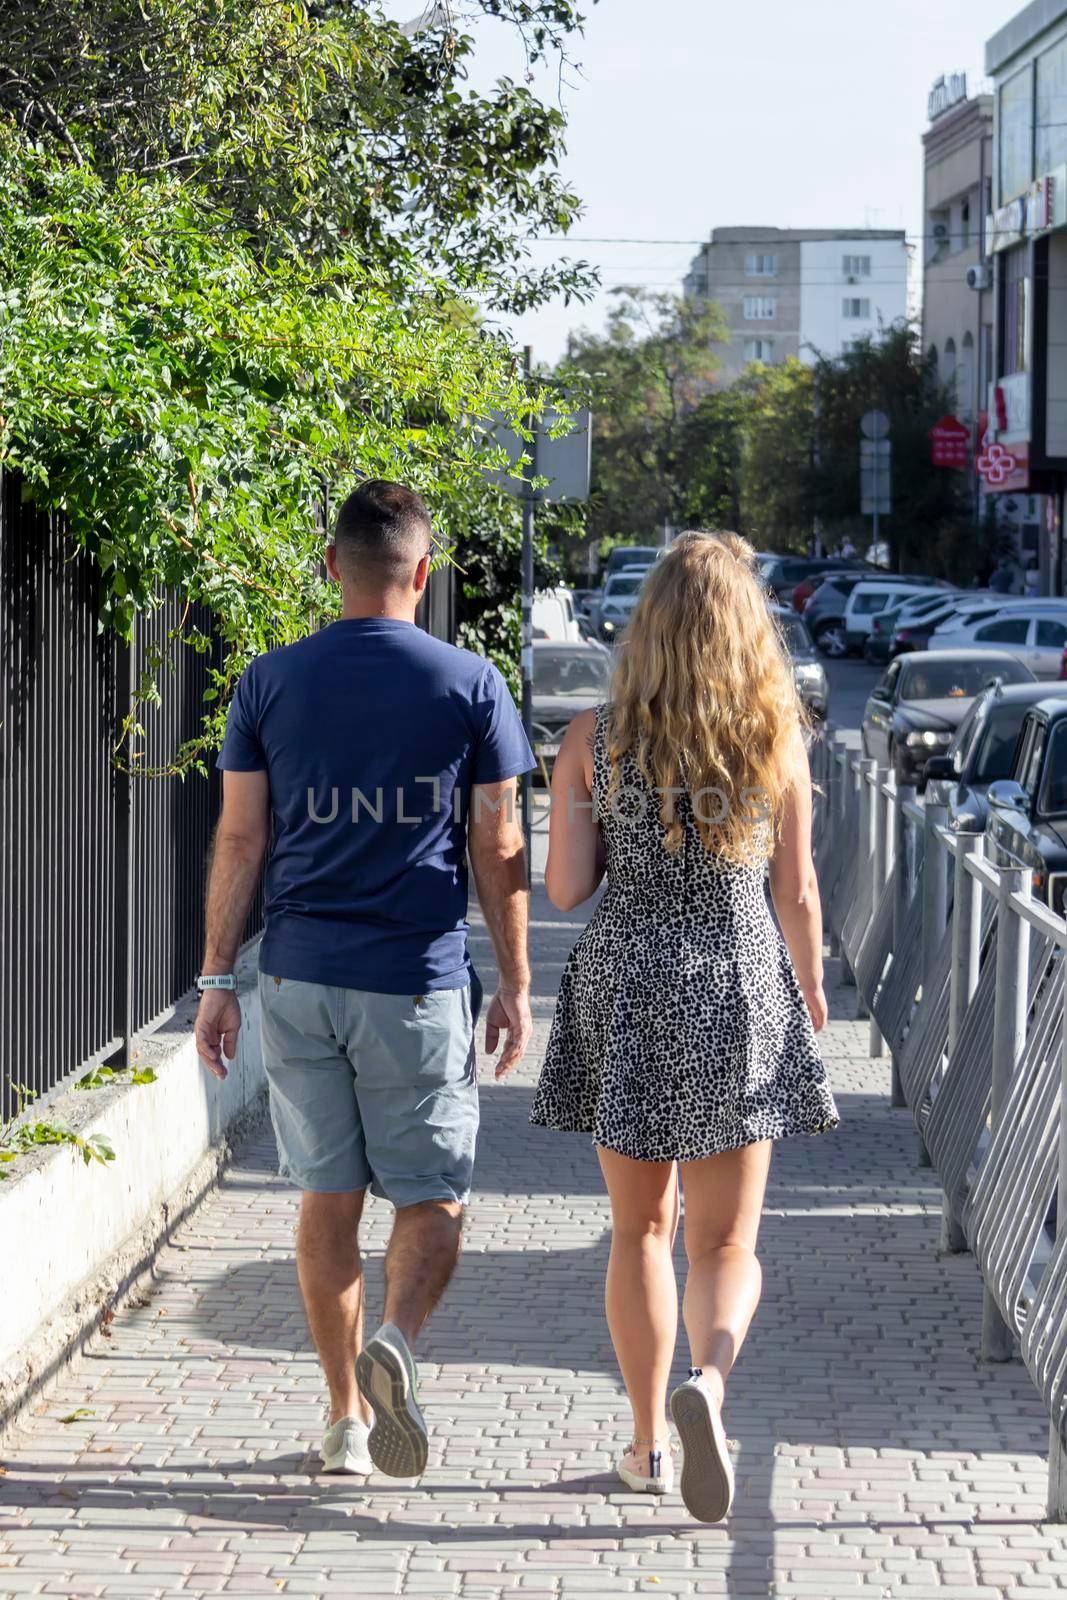 Man and woman pair walk along pavement along road. Sunny summer day. Crimea, Sudak - 10 October 2020. by Essffes